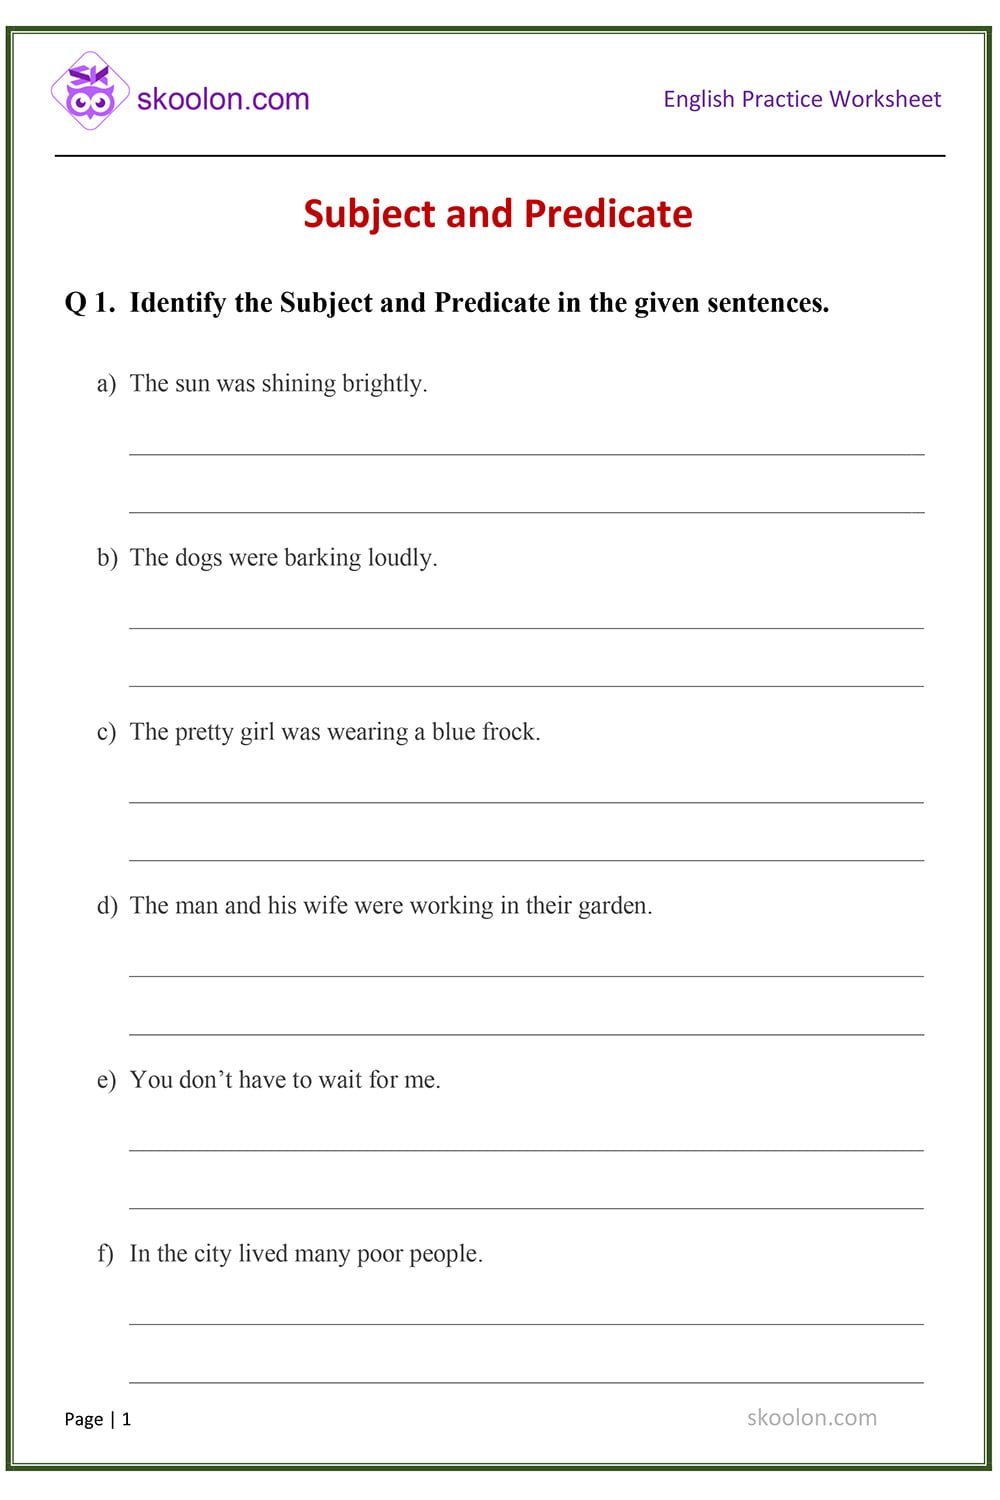 subject-and-predicate-worksheet-for-class-4-archives-skoolon